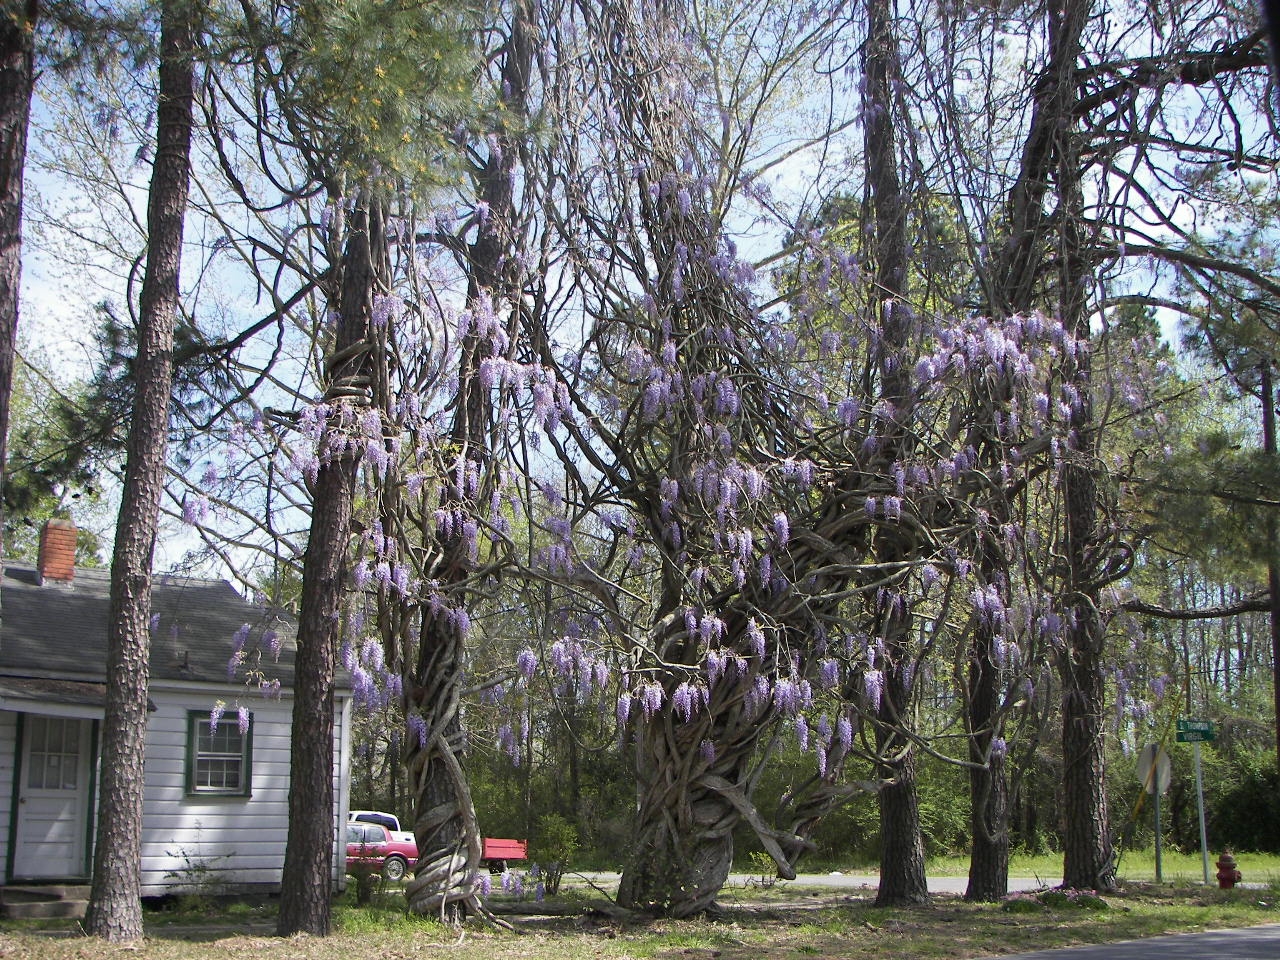 Wisteria with violet clusters of hanging flowers near a house.